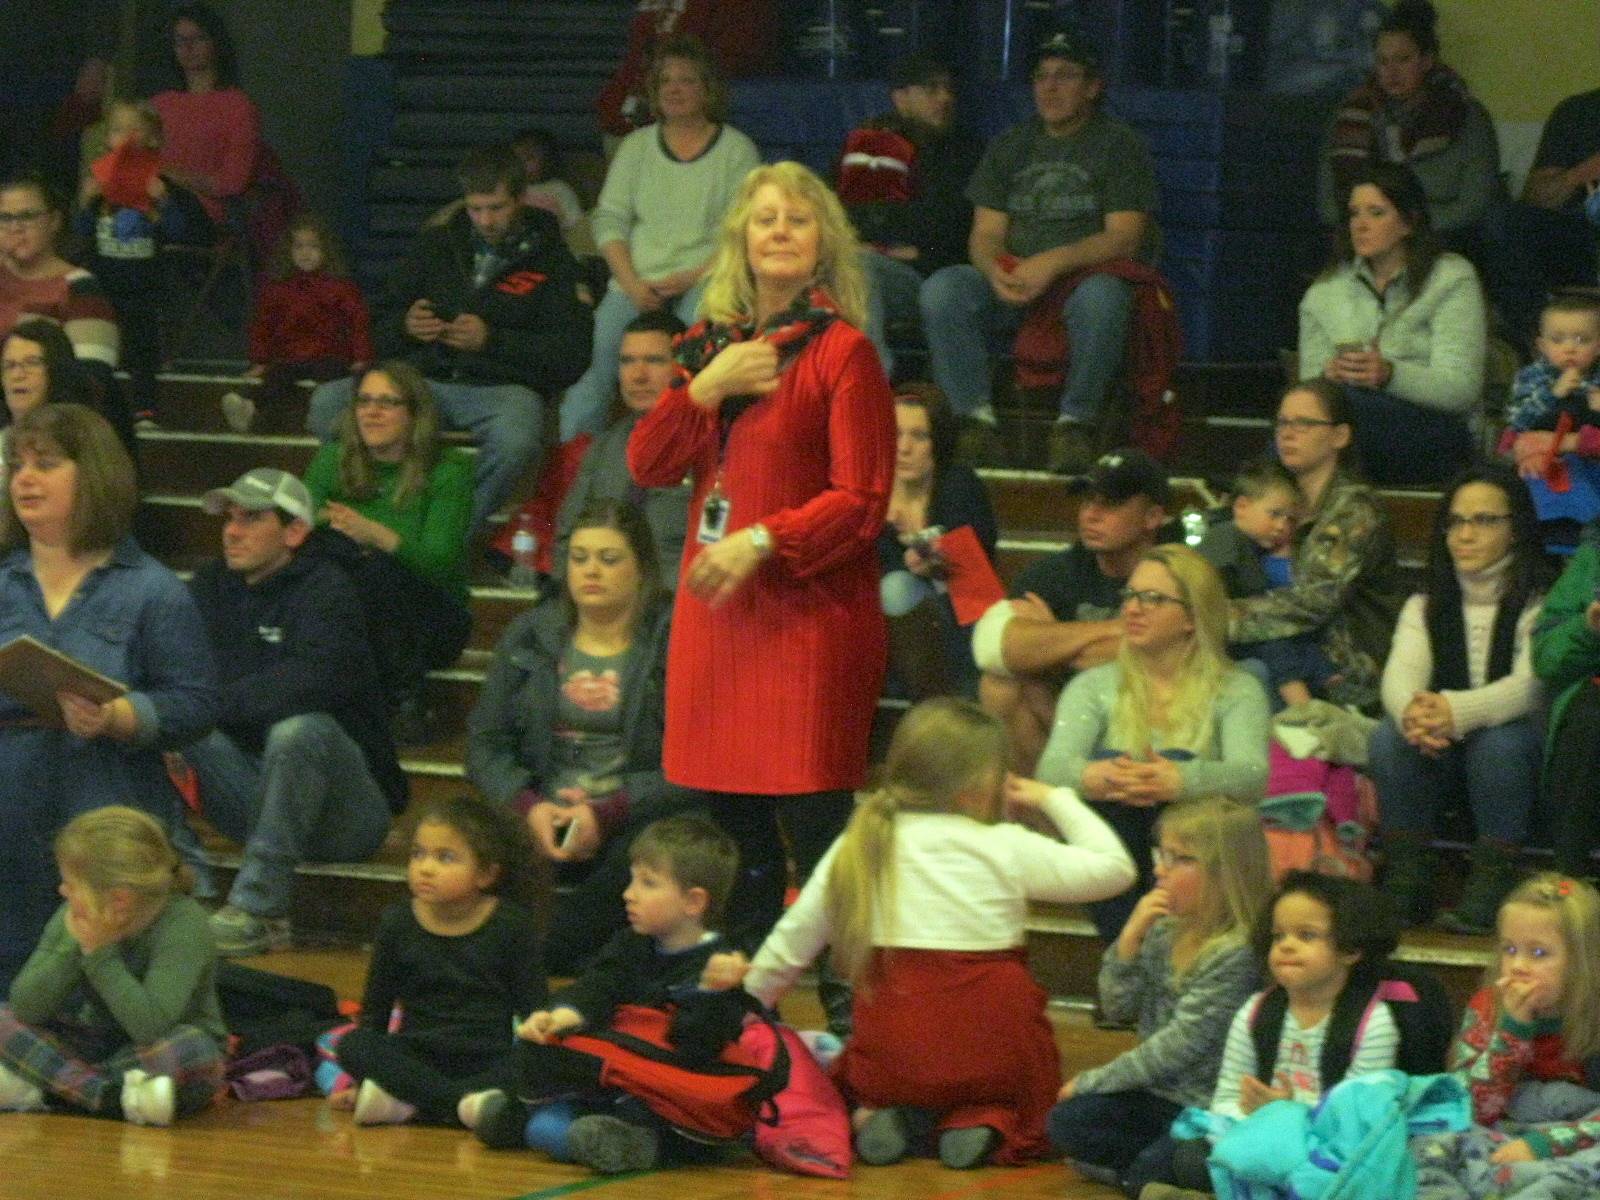 Parents and students watch Sing a long.